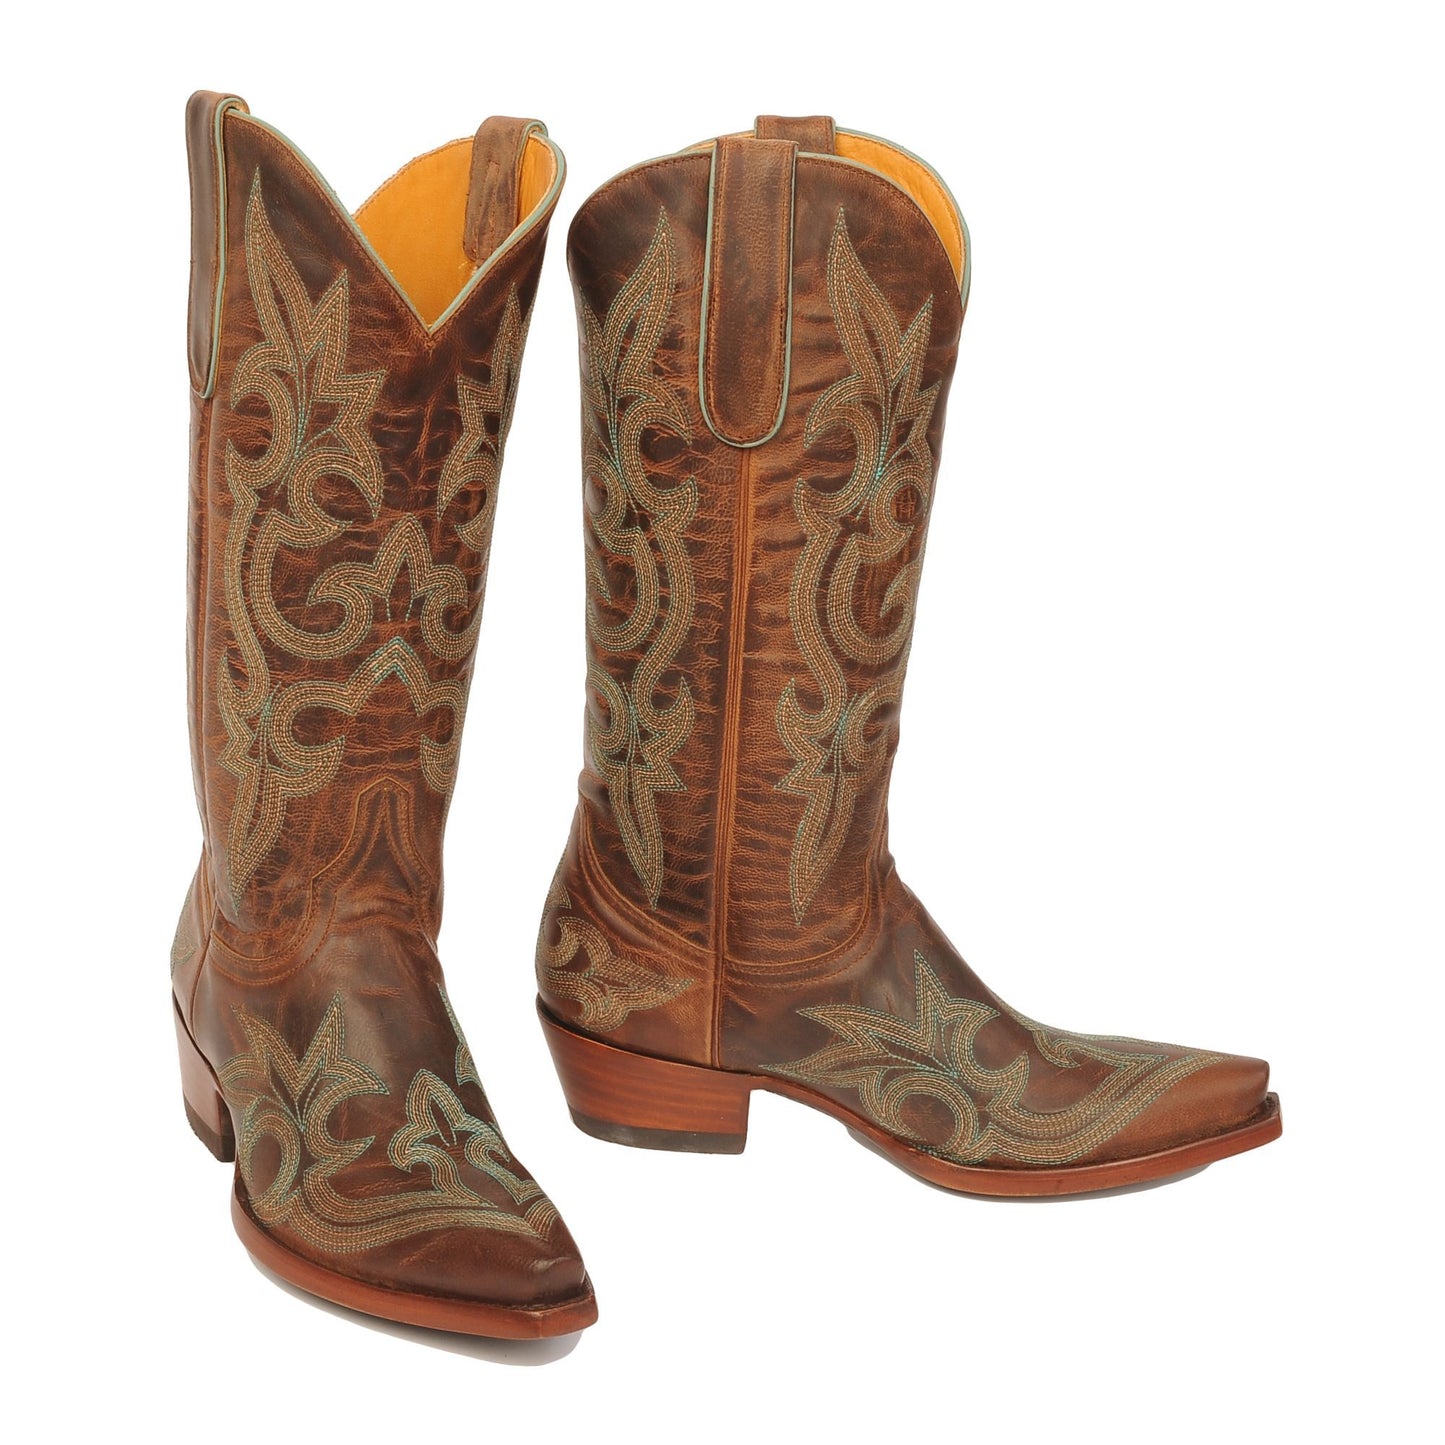 L113-13 Old Gringo Women's DIEGO Brass with Turquoise Stitching Snip Toe Boot